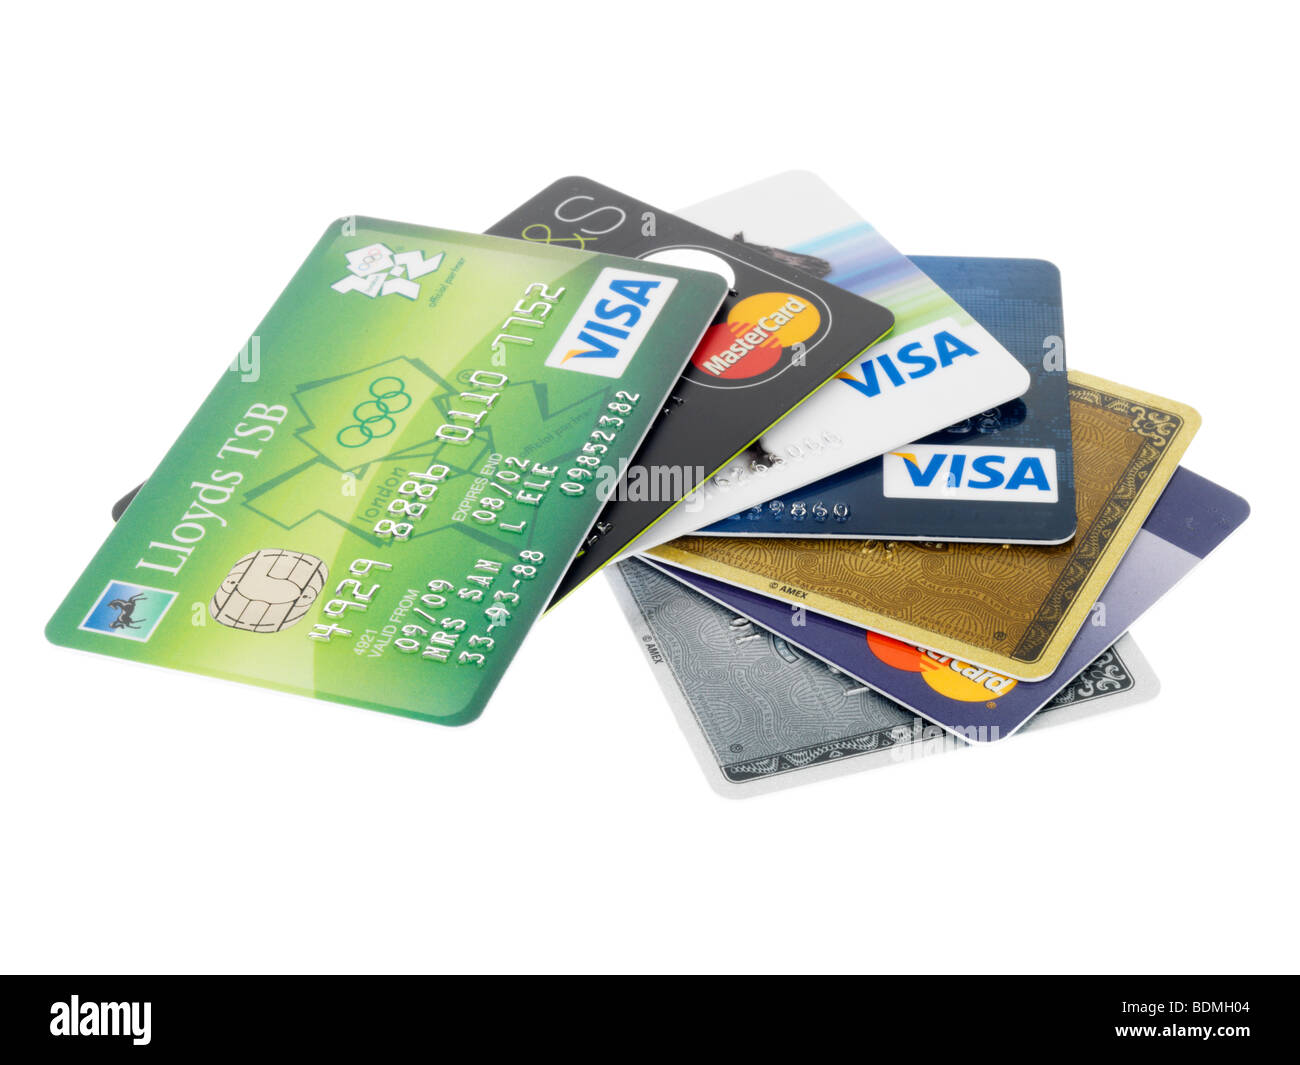 Fan of Credit Cards Stock Photo